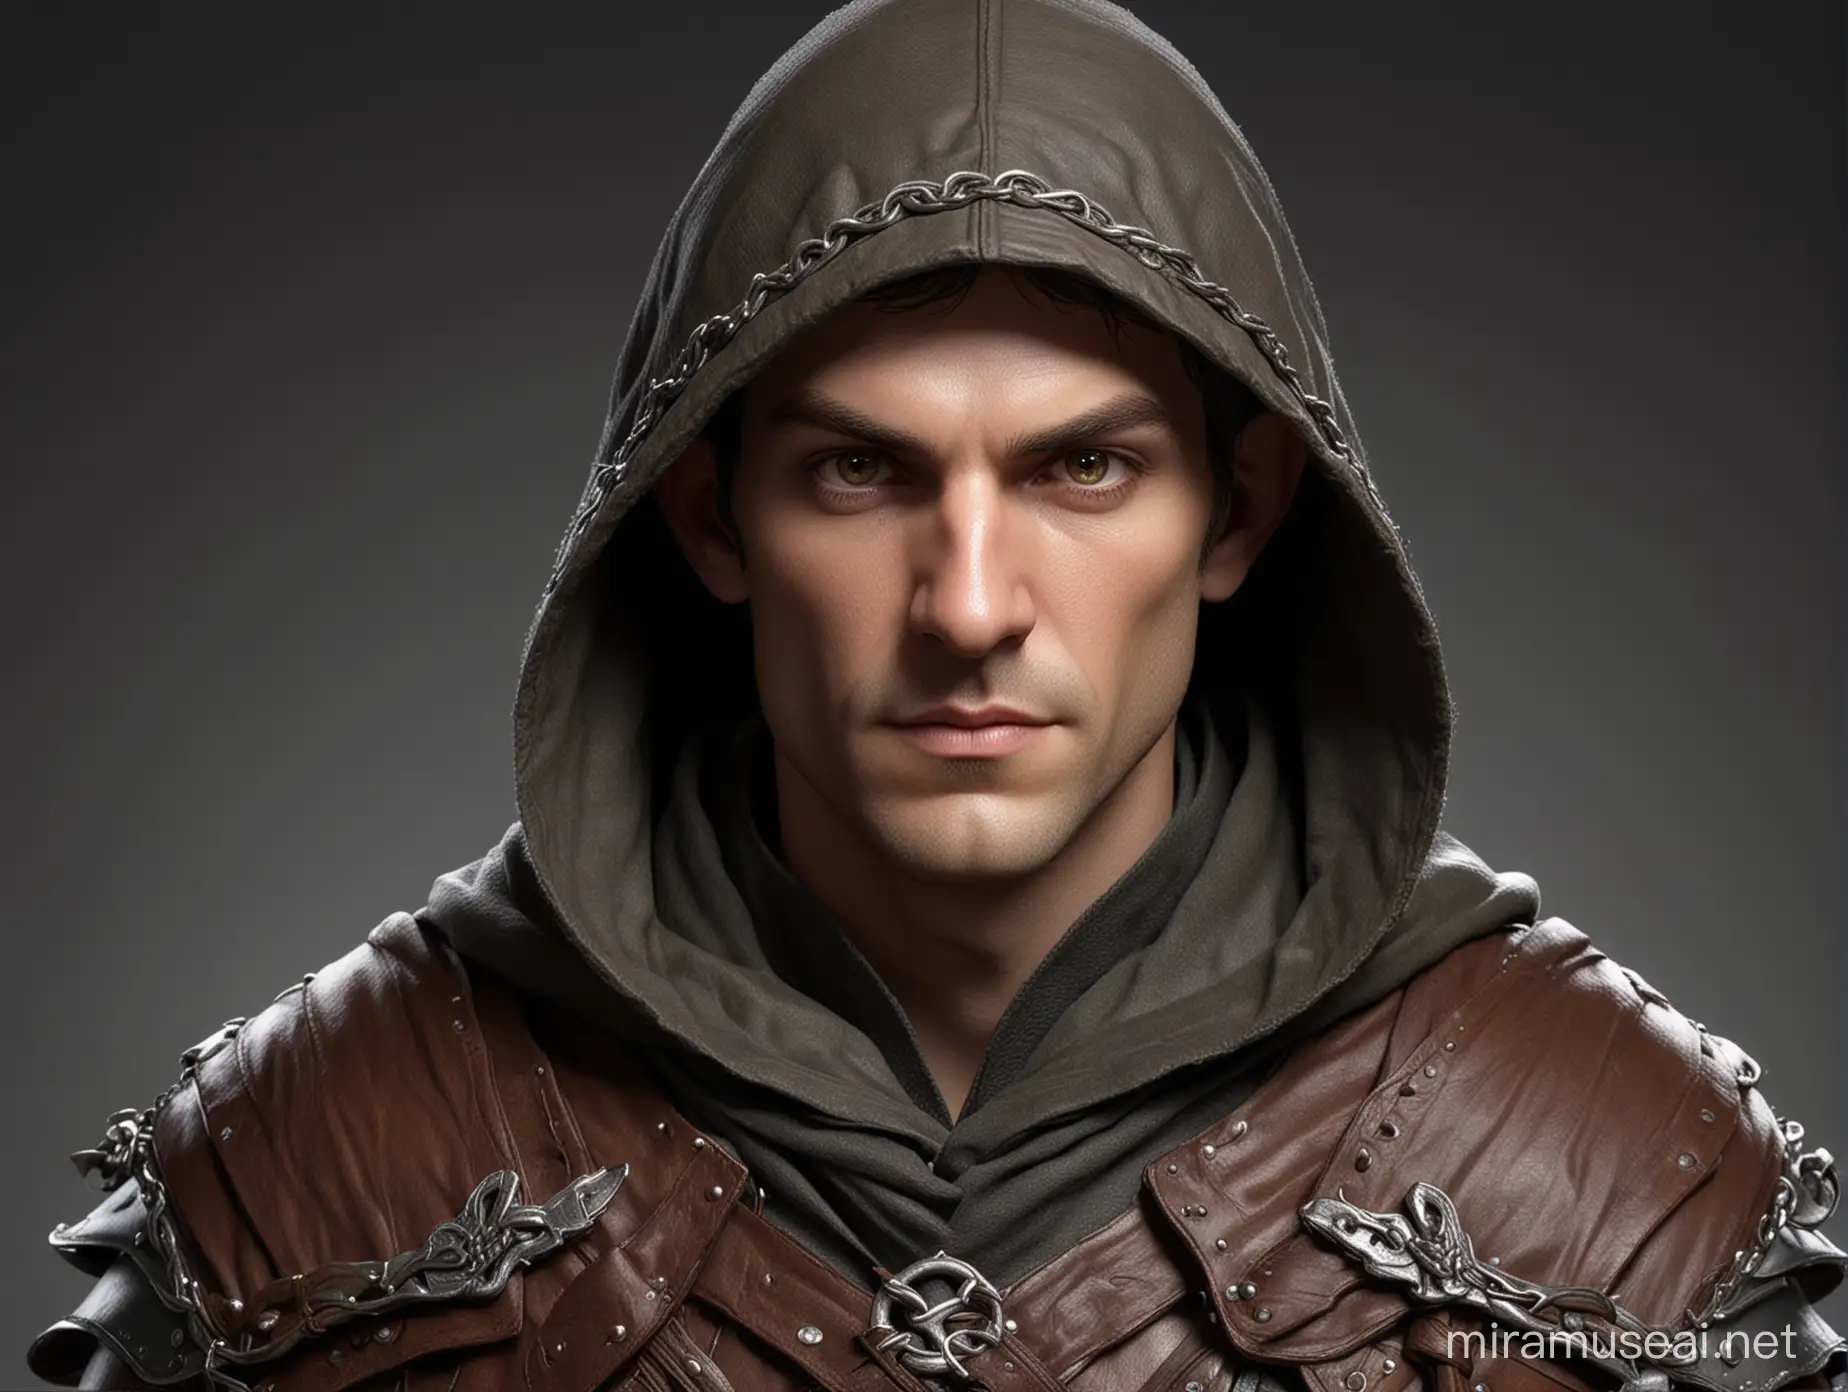 high resolution, photo realistic, Dungeons and Dragons style male elf, middle-aged, with high cheekbones, a strong jaw, stubble, pointed elf ears (partially hidden by the hood), pale skin, and long dark hair, held back by woven leather headband. He has amber-colored eyes. Medieval fantasy-style leather armor, with chainmail underneath. lots of straps, pouches, potions. a mix of a Wizard, warrior, and thief. he is wearing a hooded cloak, hood up, the cloak flares behind him. full body image, slightly turned away from the camera.